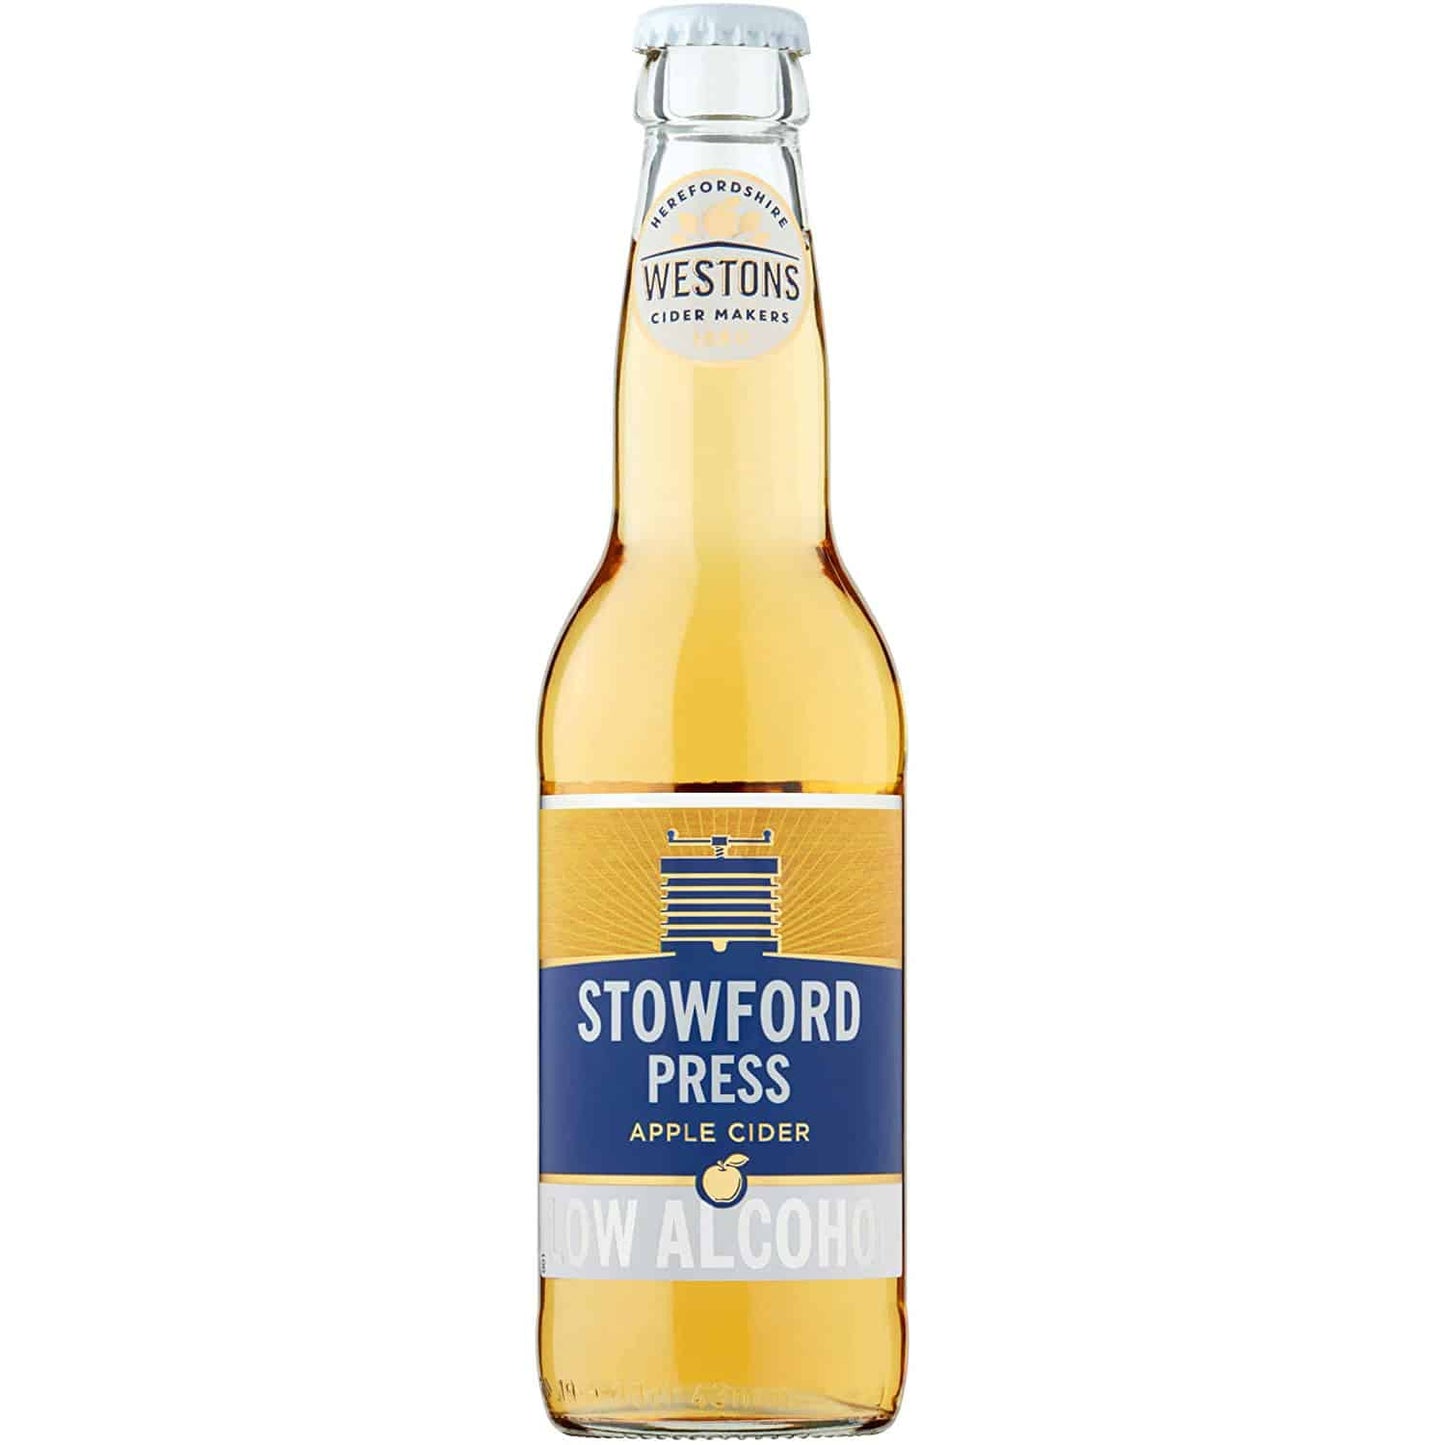 Stowford Press Low Alcohol Cider Bottle